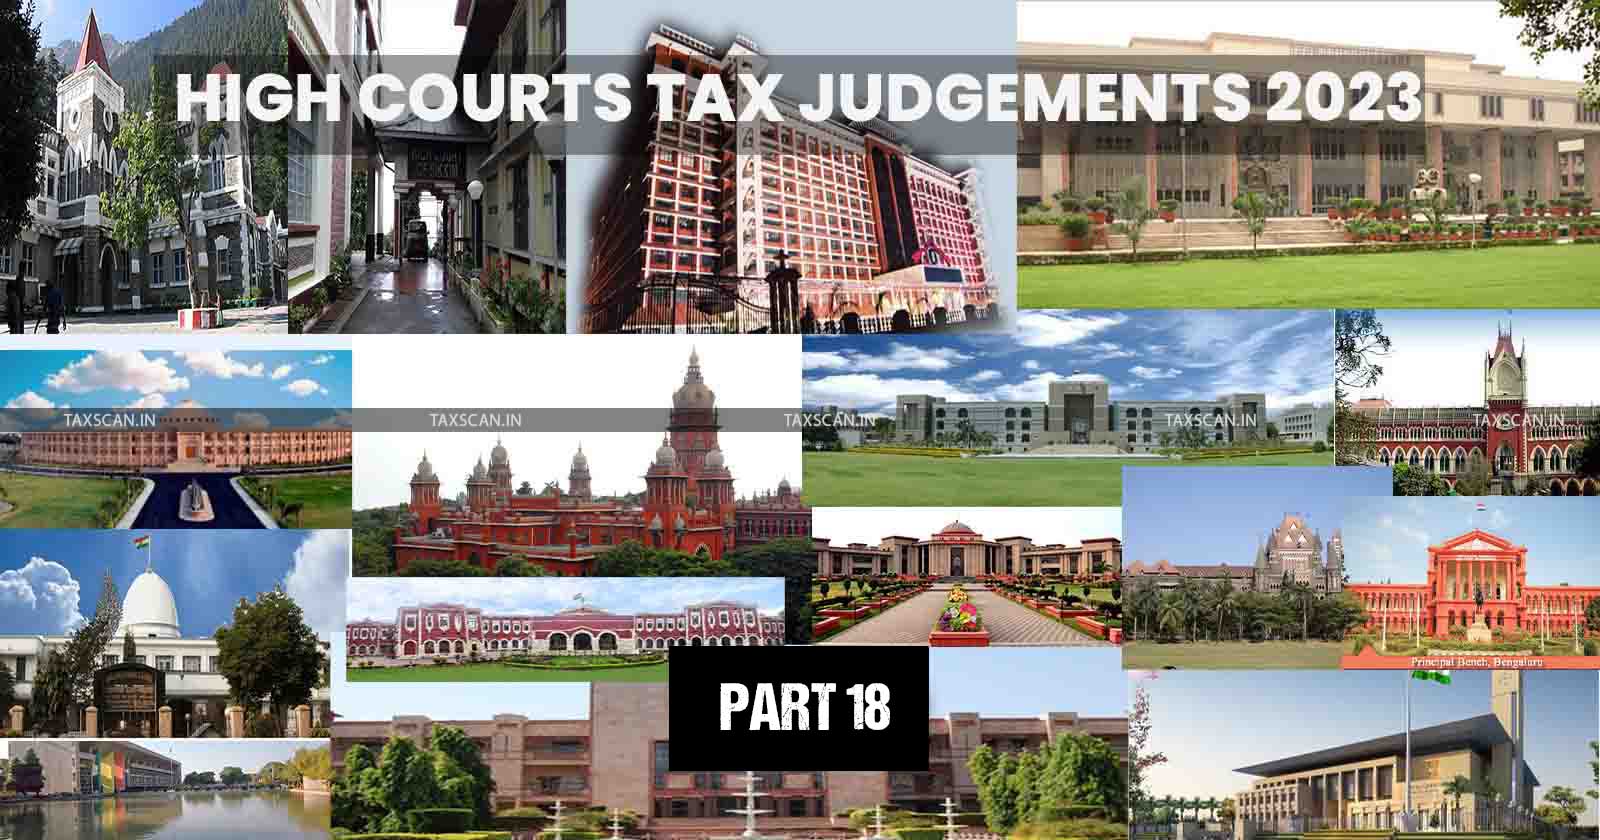 High Courts Annual Digest 2023 - Tax Judgments of High Courts - High Courts - hc - Annual Digest 2023 - taxscan